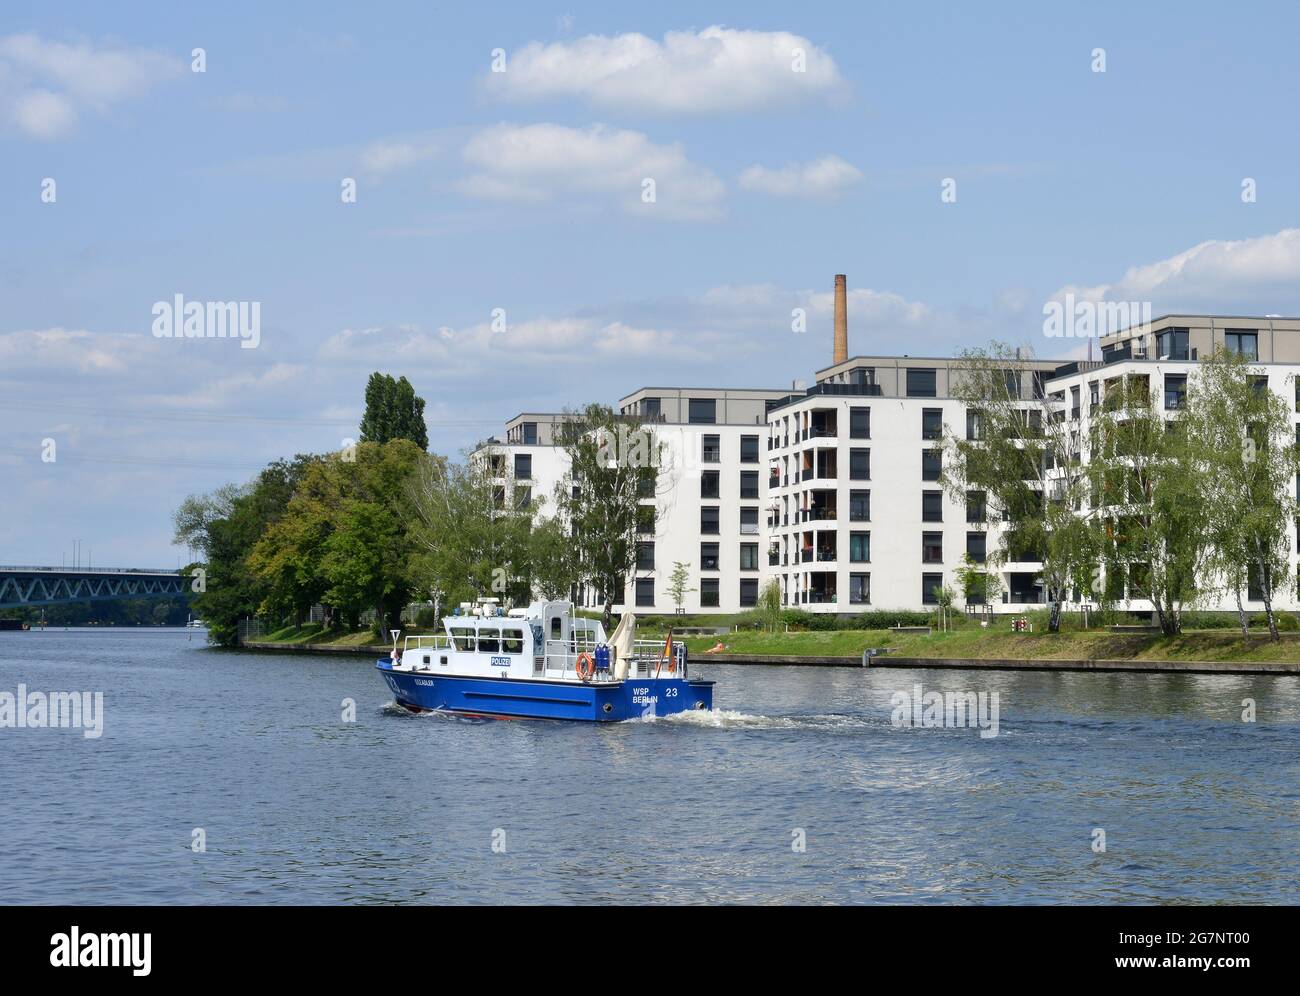 Berlin, Germany, a water police patrol boat passing on the Spree river fresh build apartment houses Stock Photo